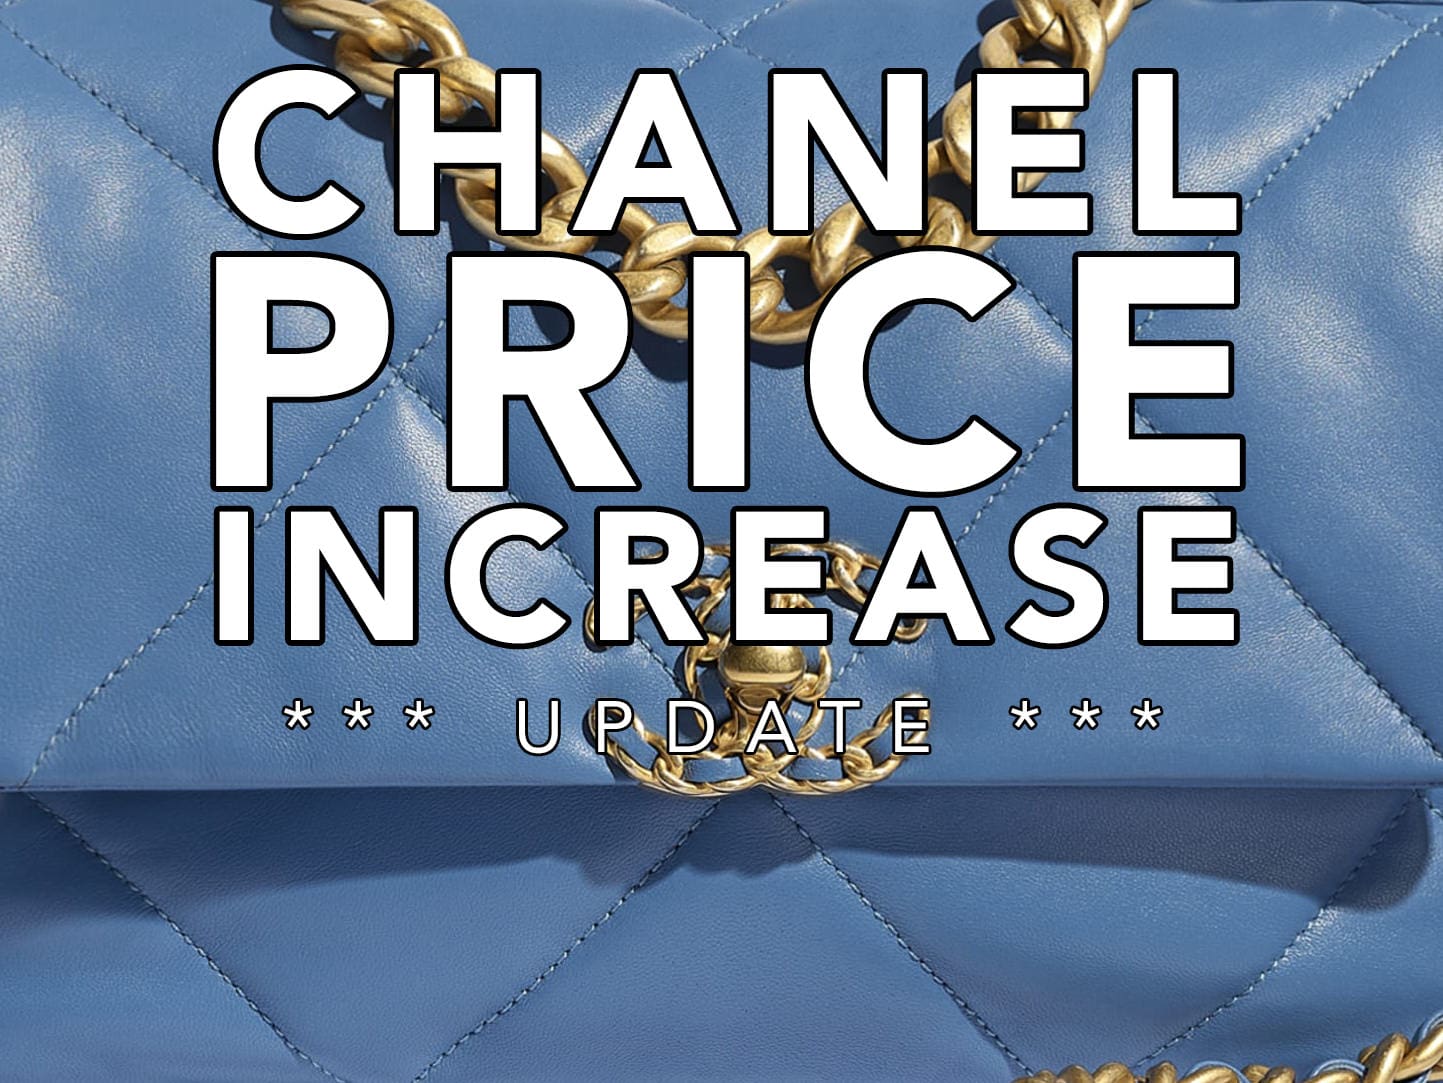 ArvindShops - Chanel Cruise 2023 Bags Are Here and We Are Obsessed